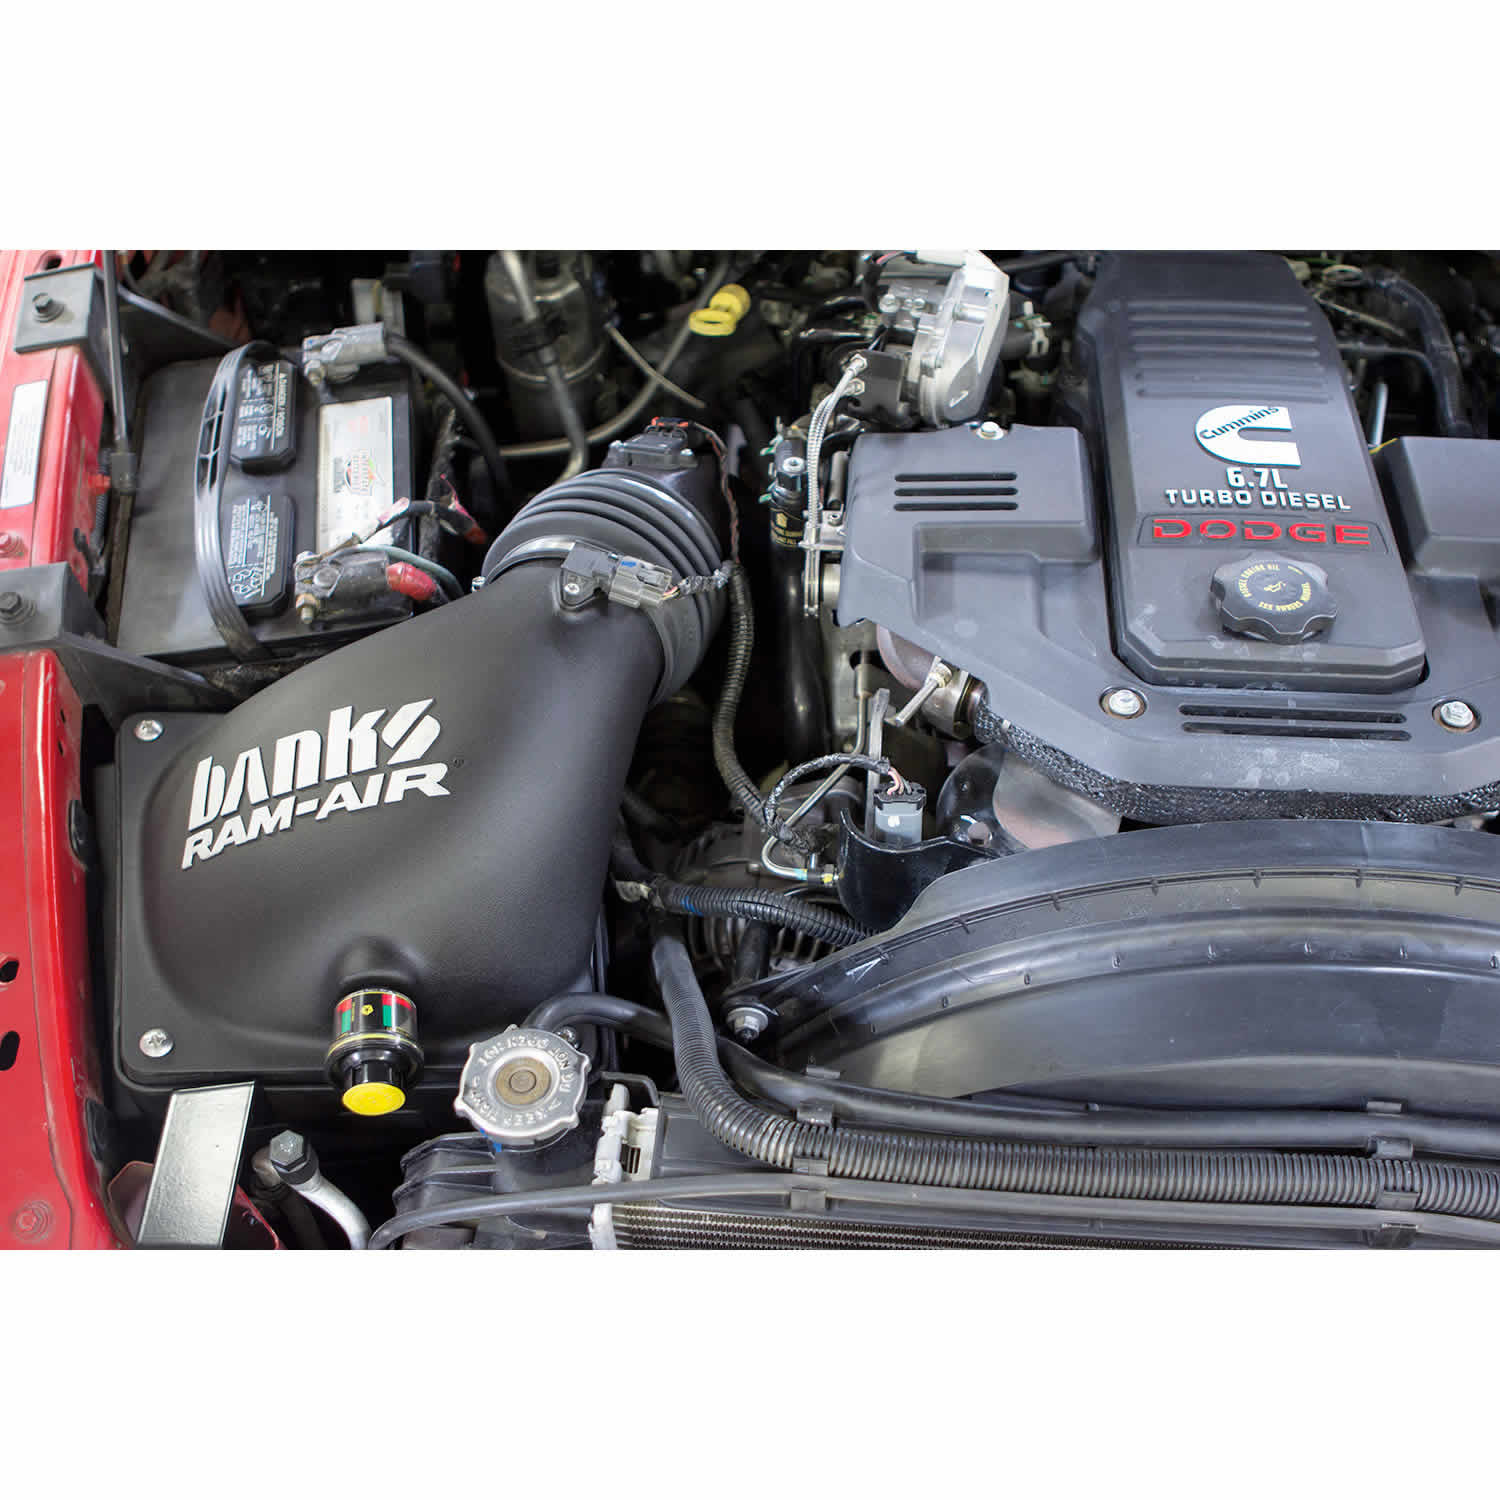 Installed photo of the Banks Ram-Air intake in a RAM 6.7L Cummins